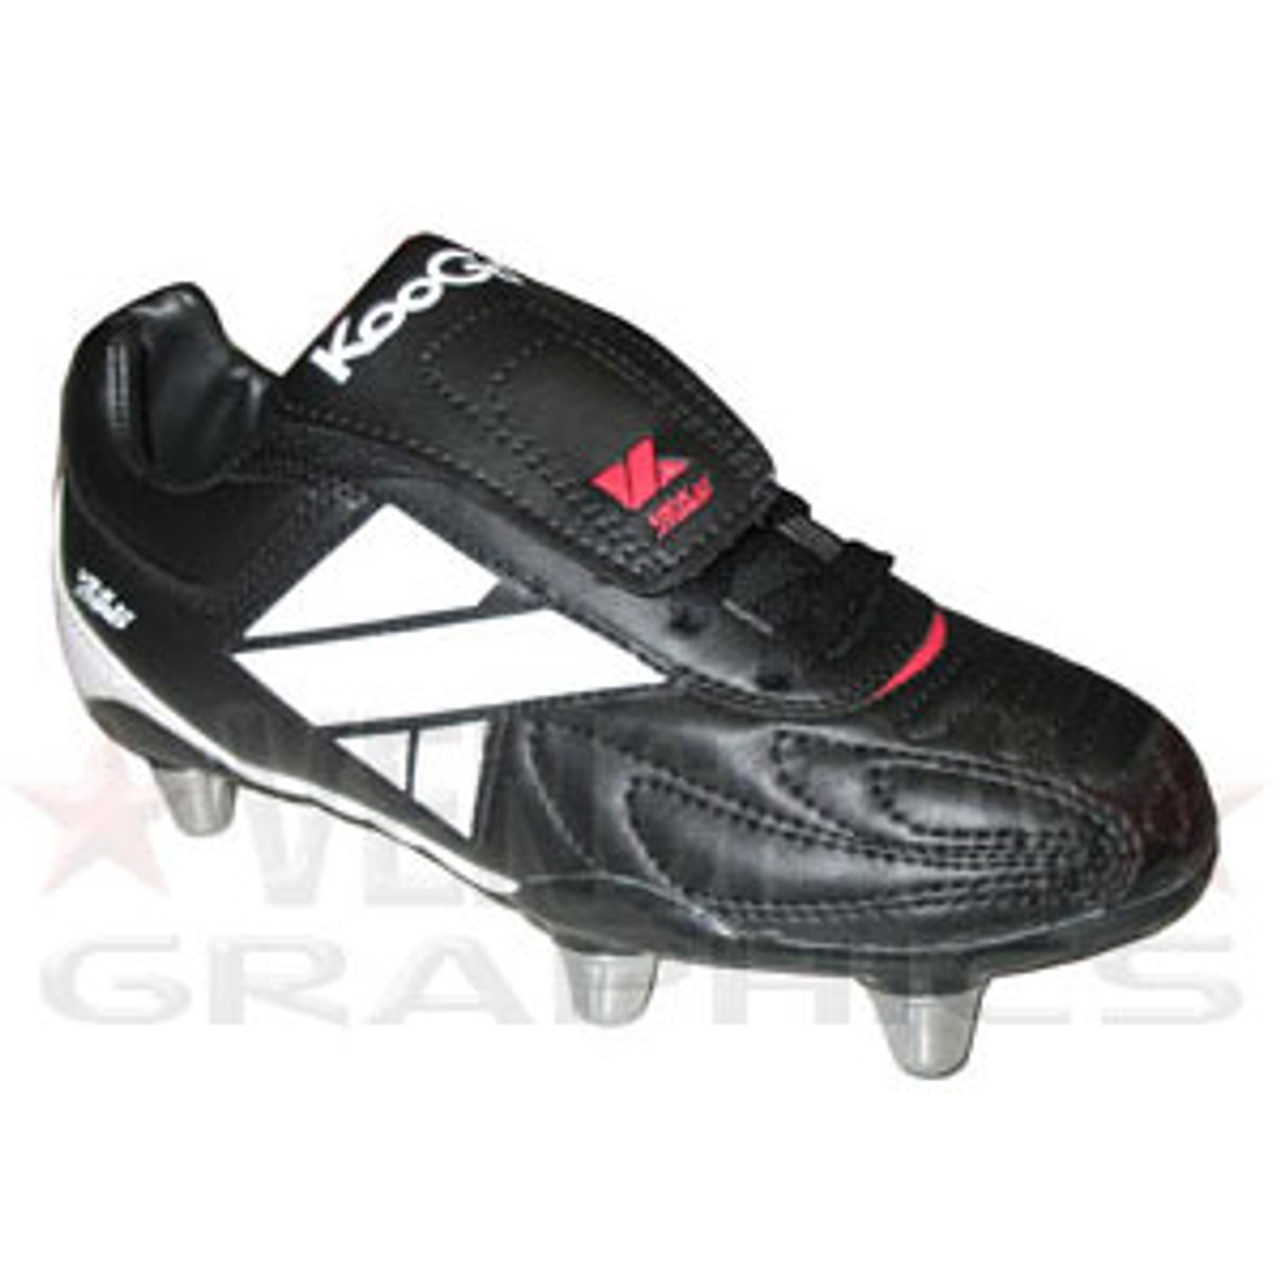 moulded rugby boots uk